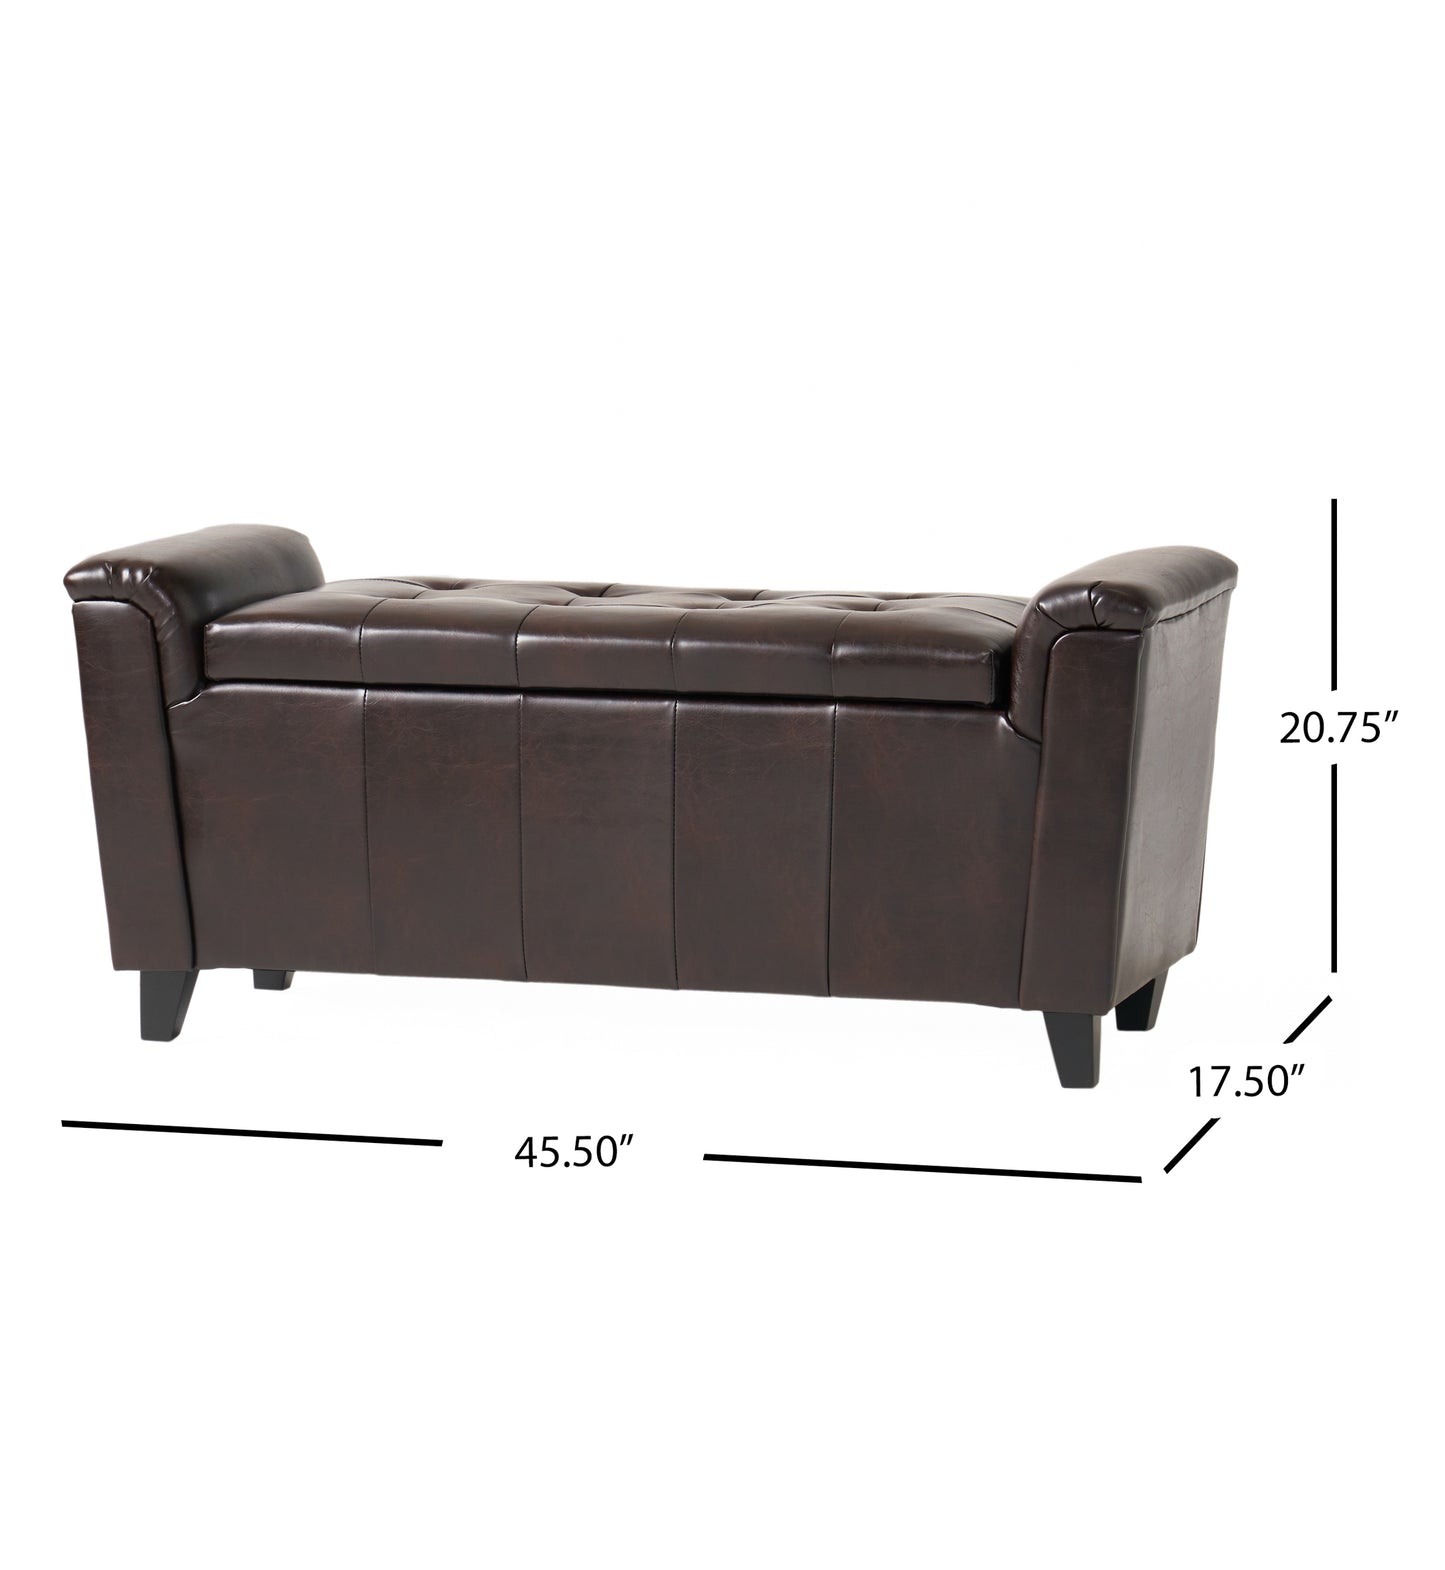 James Brown Tufted Leather Armed Storage Ottoman Bench